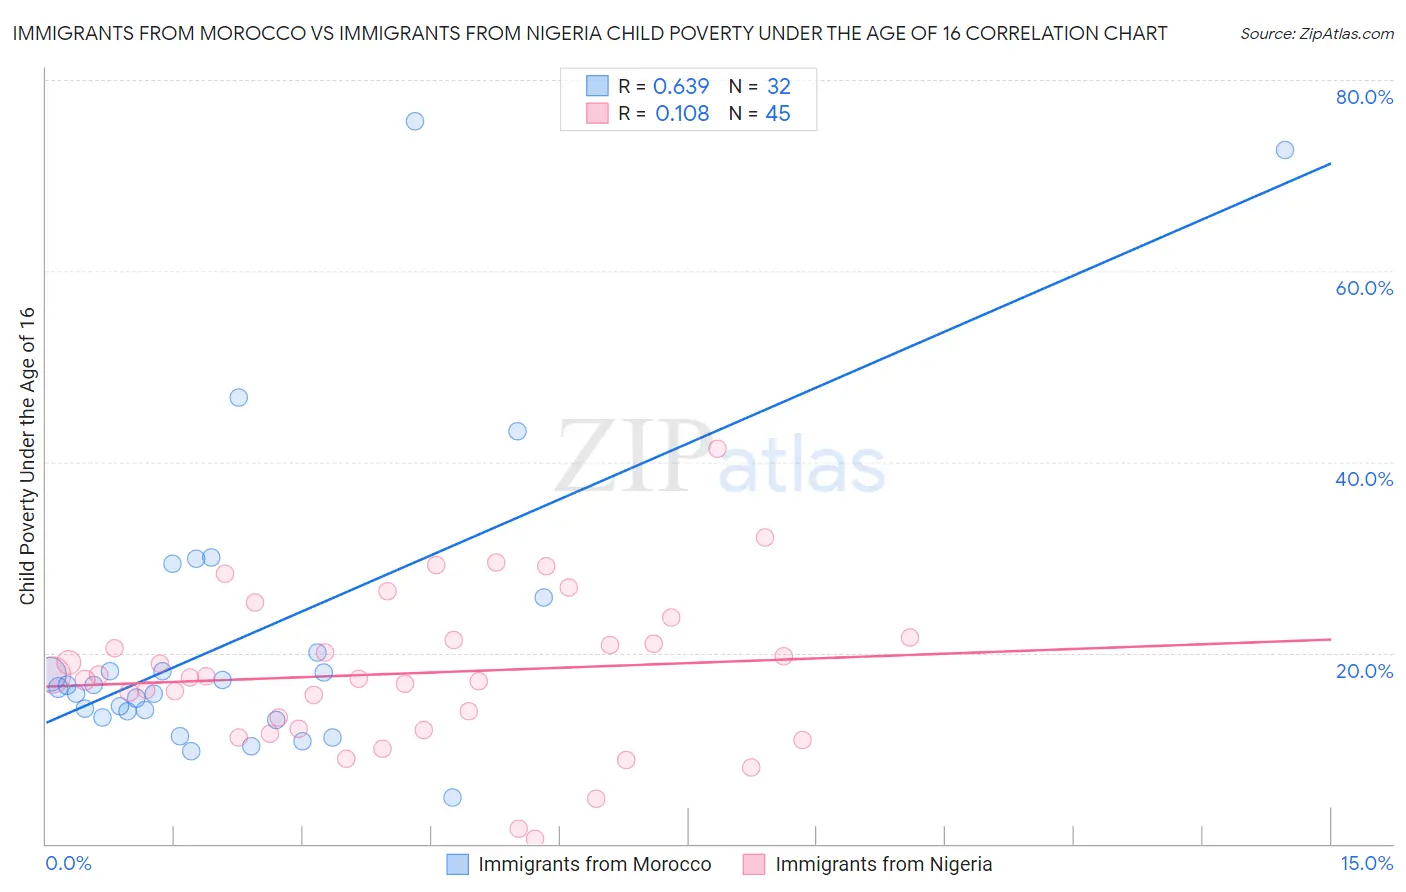 Immigrants from Morocco vs Immigrants from Nigeria Child Poverty Under the Age of 16